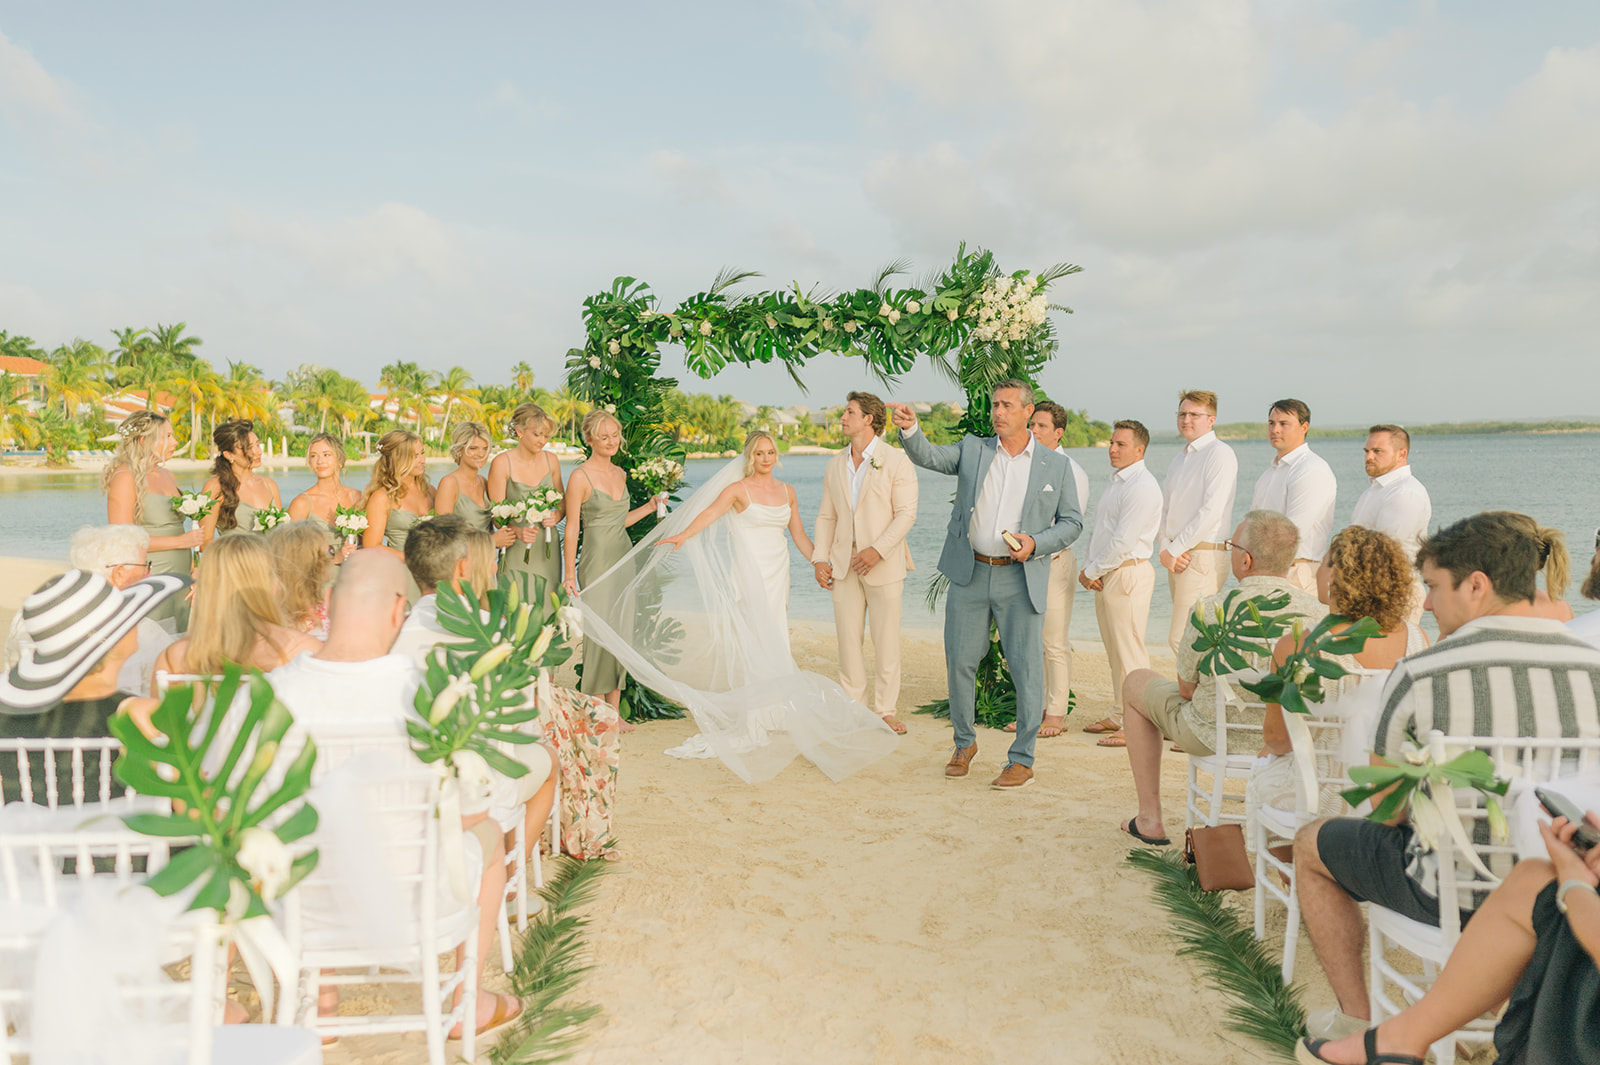 Antigua wedding photographer captures candid getting ready moments
